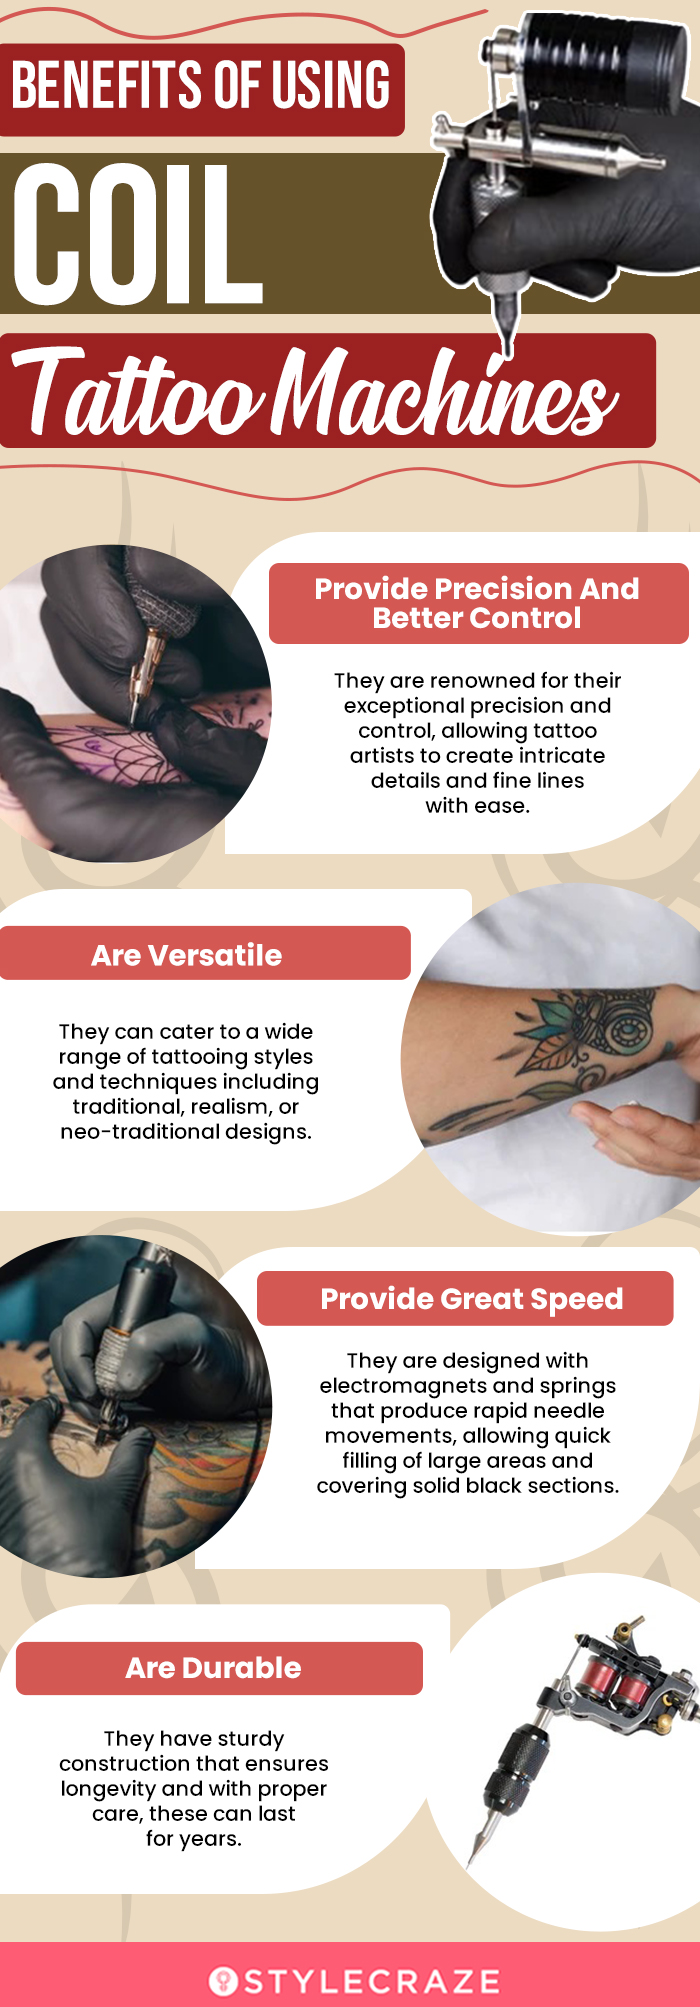 Premium Photo | Preparing ink machine. professional tattoo master setting  needle inside of tattoo machine and constructing all details together